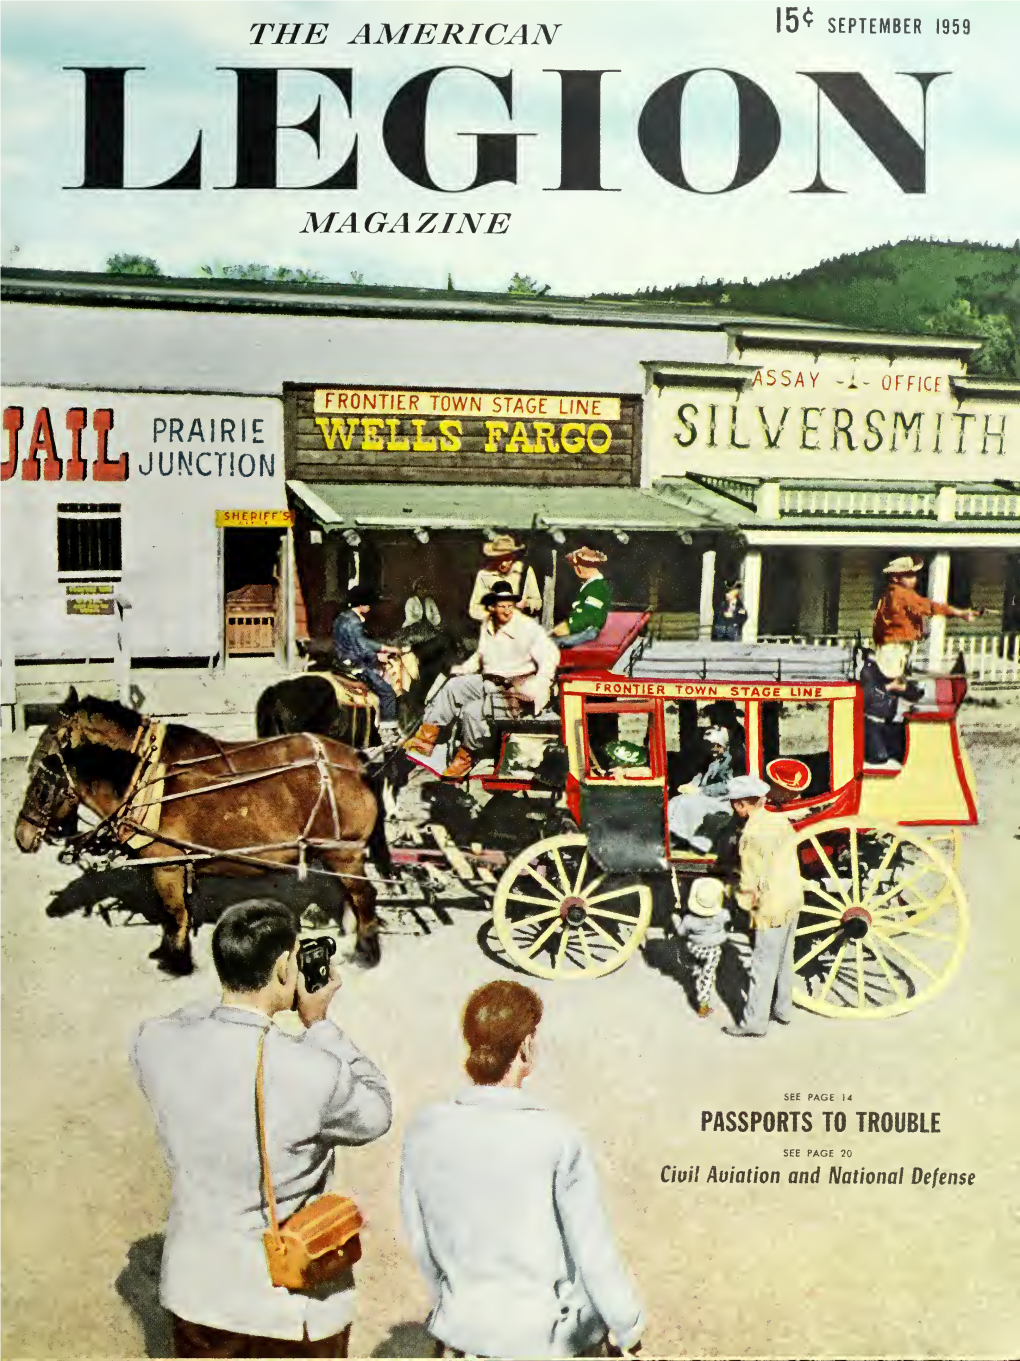 The American Legion Magazine Aaidwestern Safety with Today's Powerful Office Sporting Loads